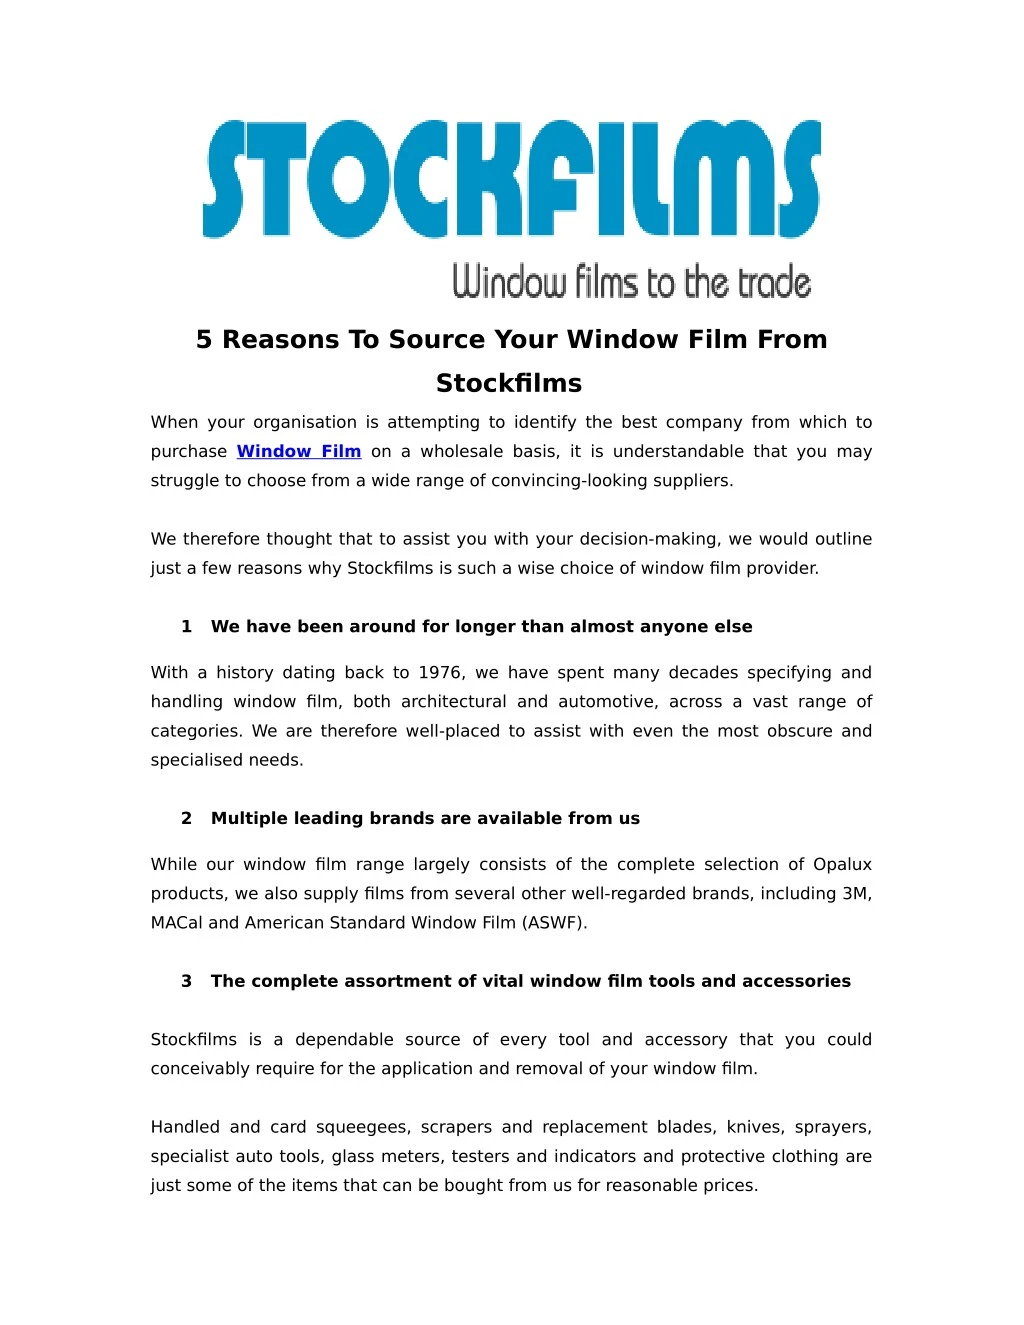 5 reasons to source your window film from